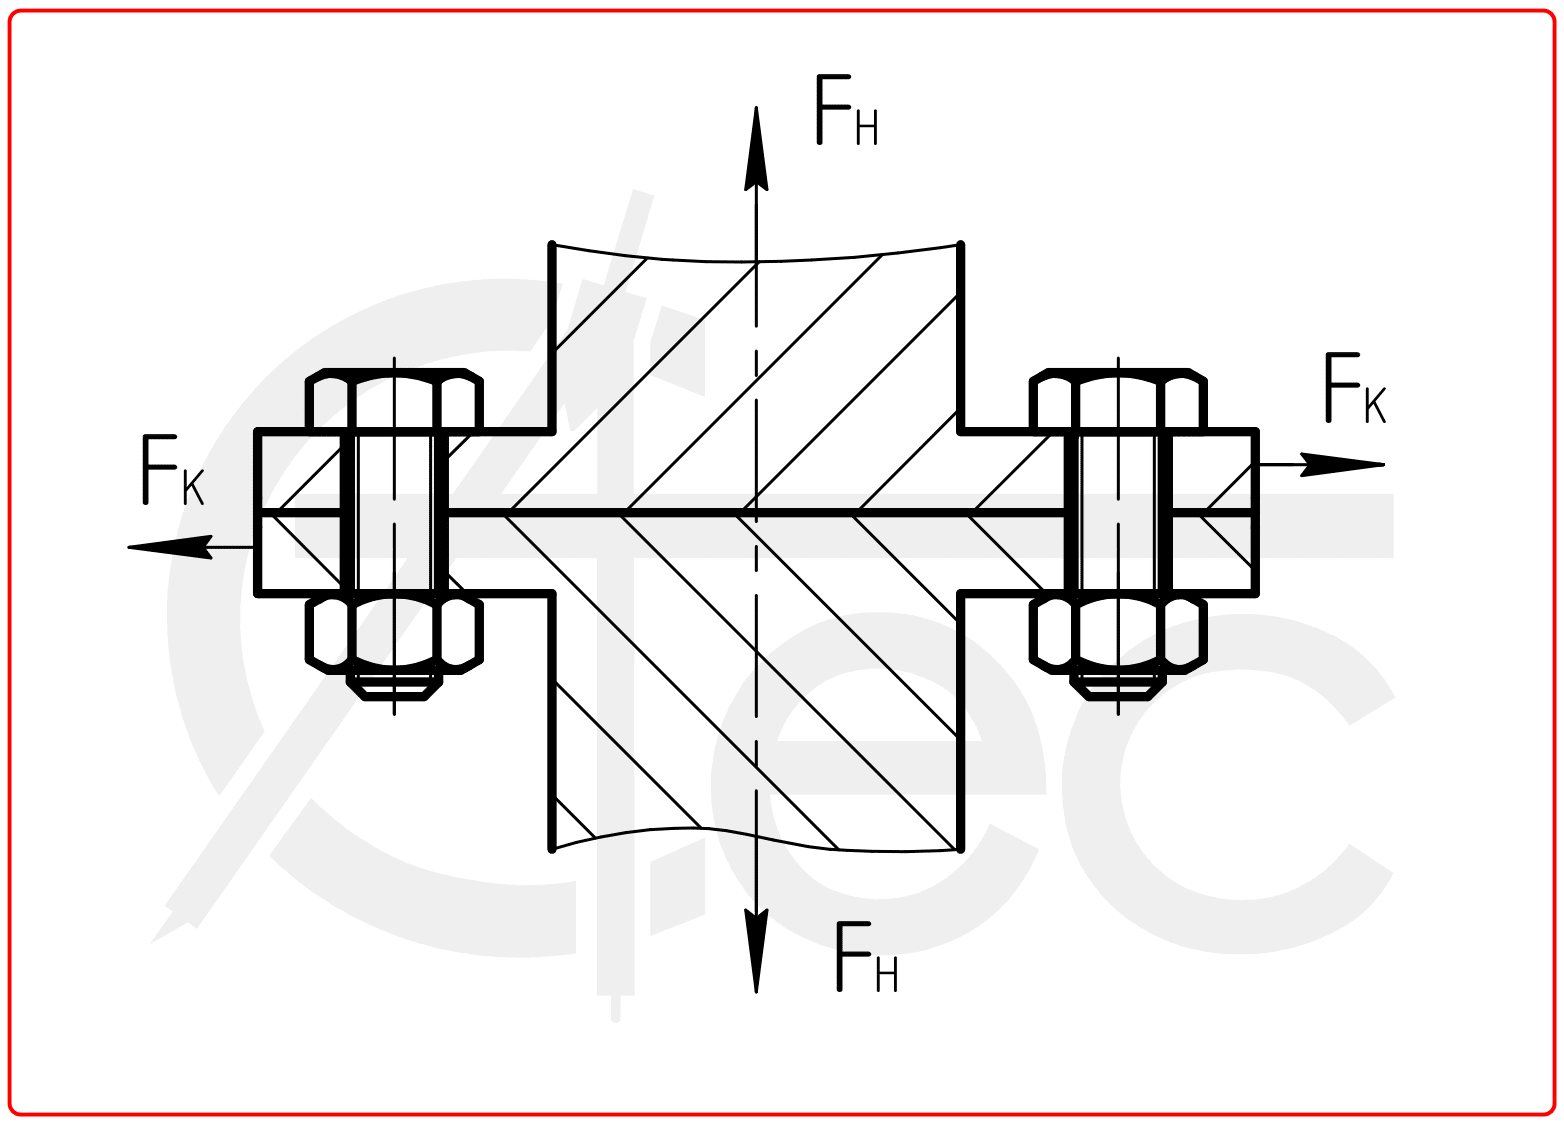 Calculation of Flange Connection